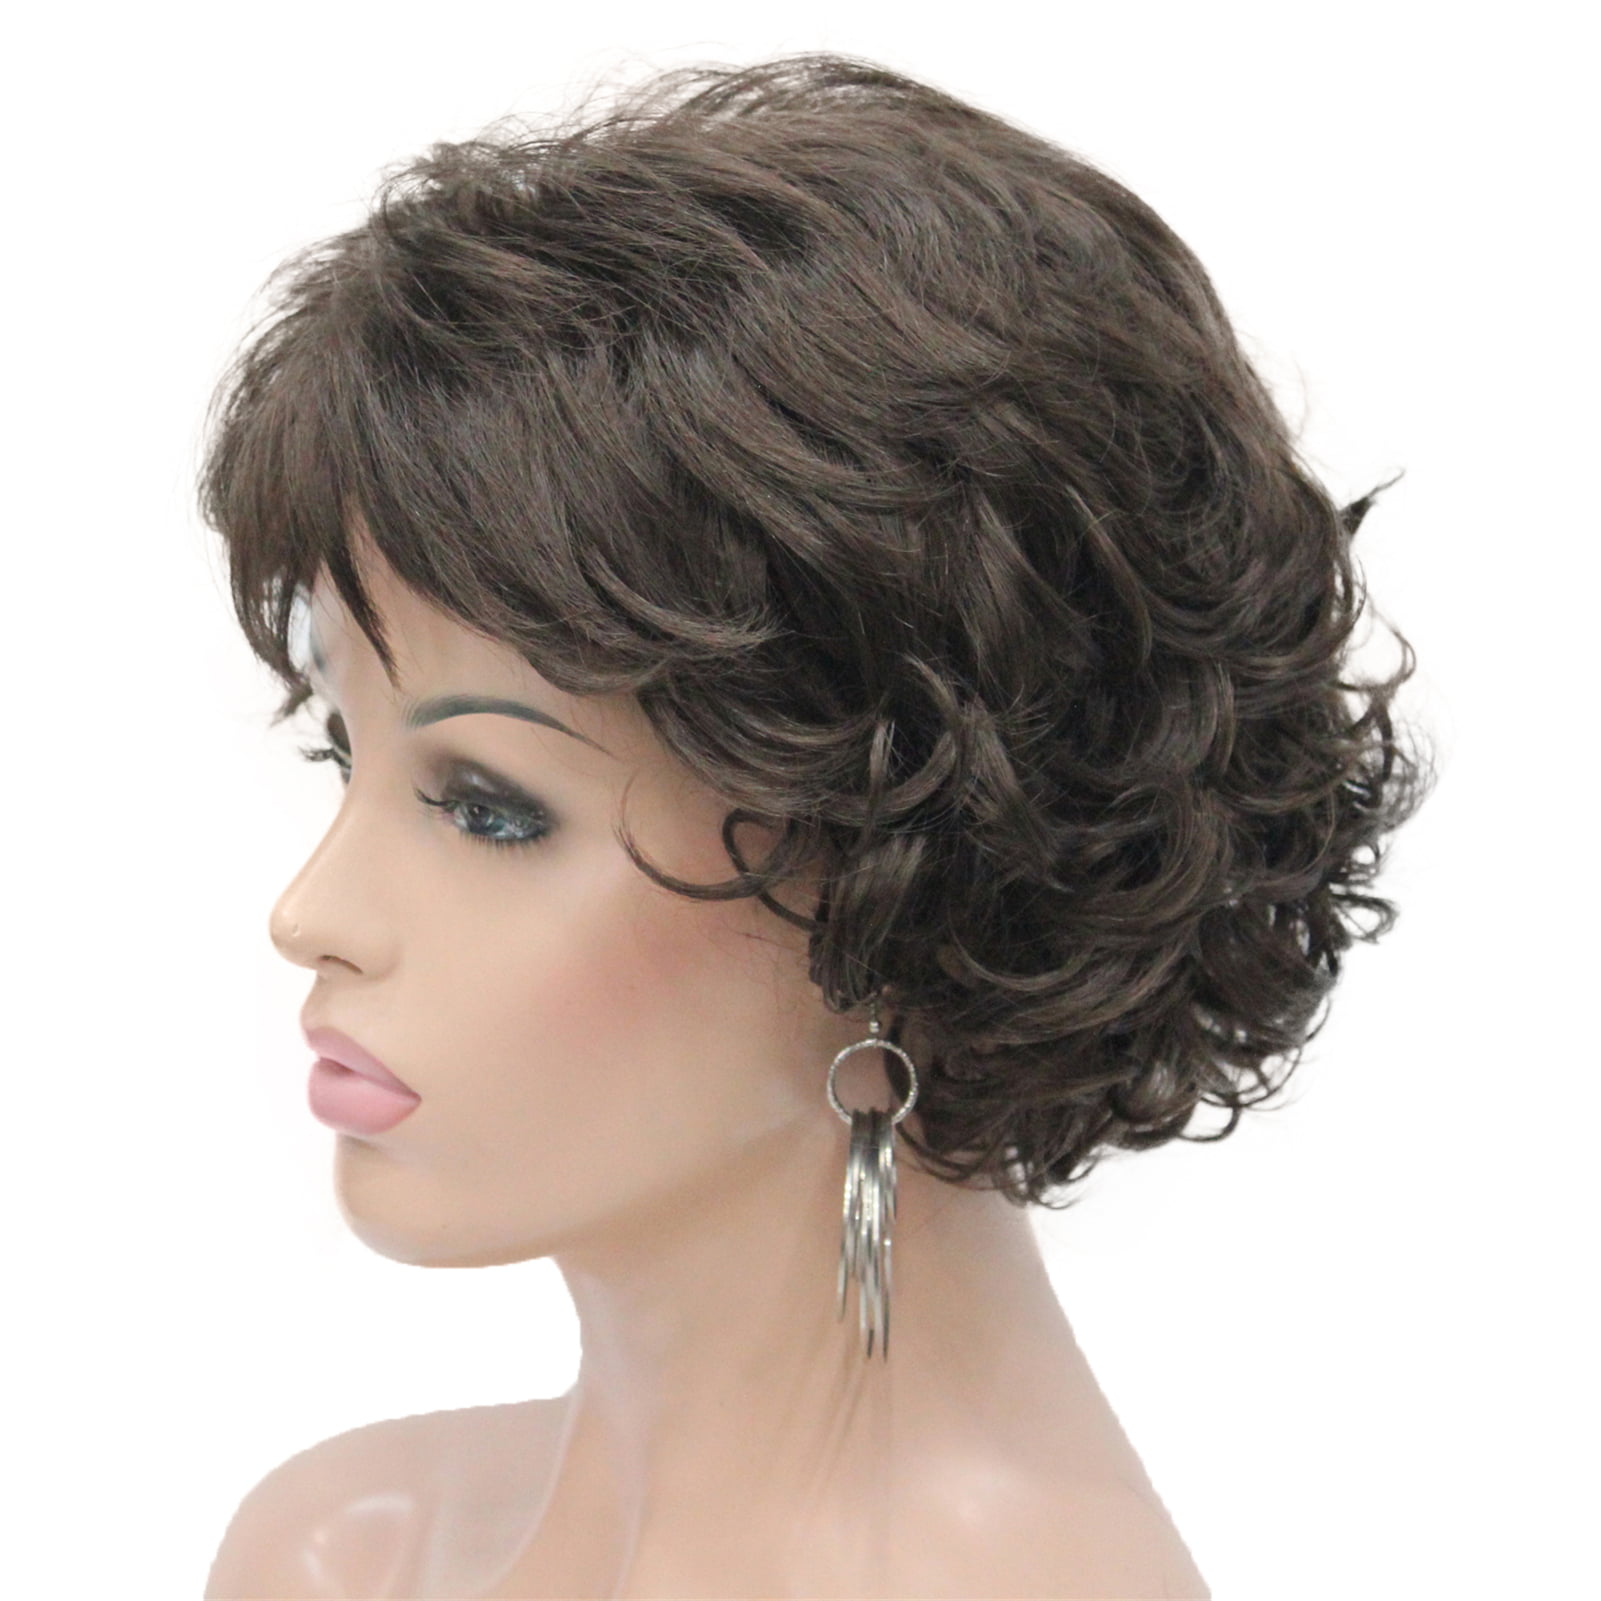  NMD&LR Short Wigs for Women, Temperament Fluffy Pixie Cut  Straight Hair Middle-Aged and Elderly Wigs for Women's Heat-Resistant  Natural Hair for Daily Use (Brown Lack) : Beauty & Personal Care